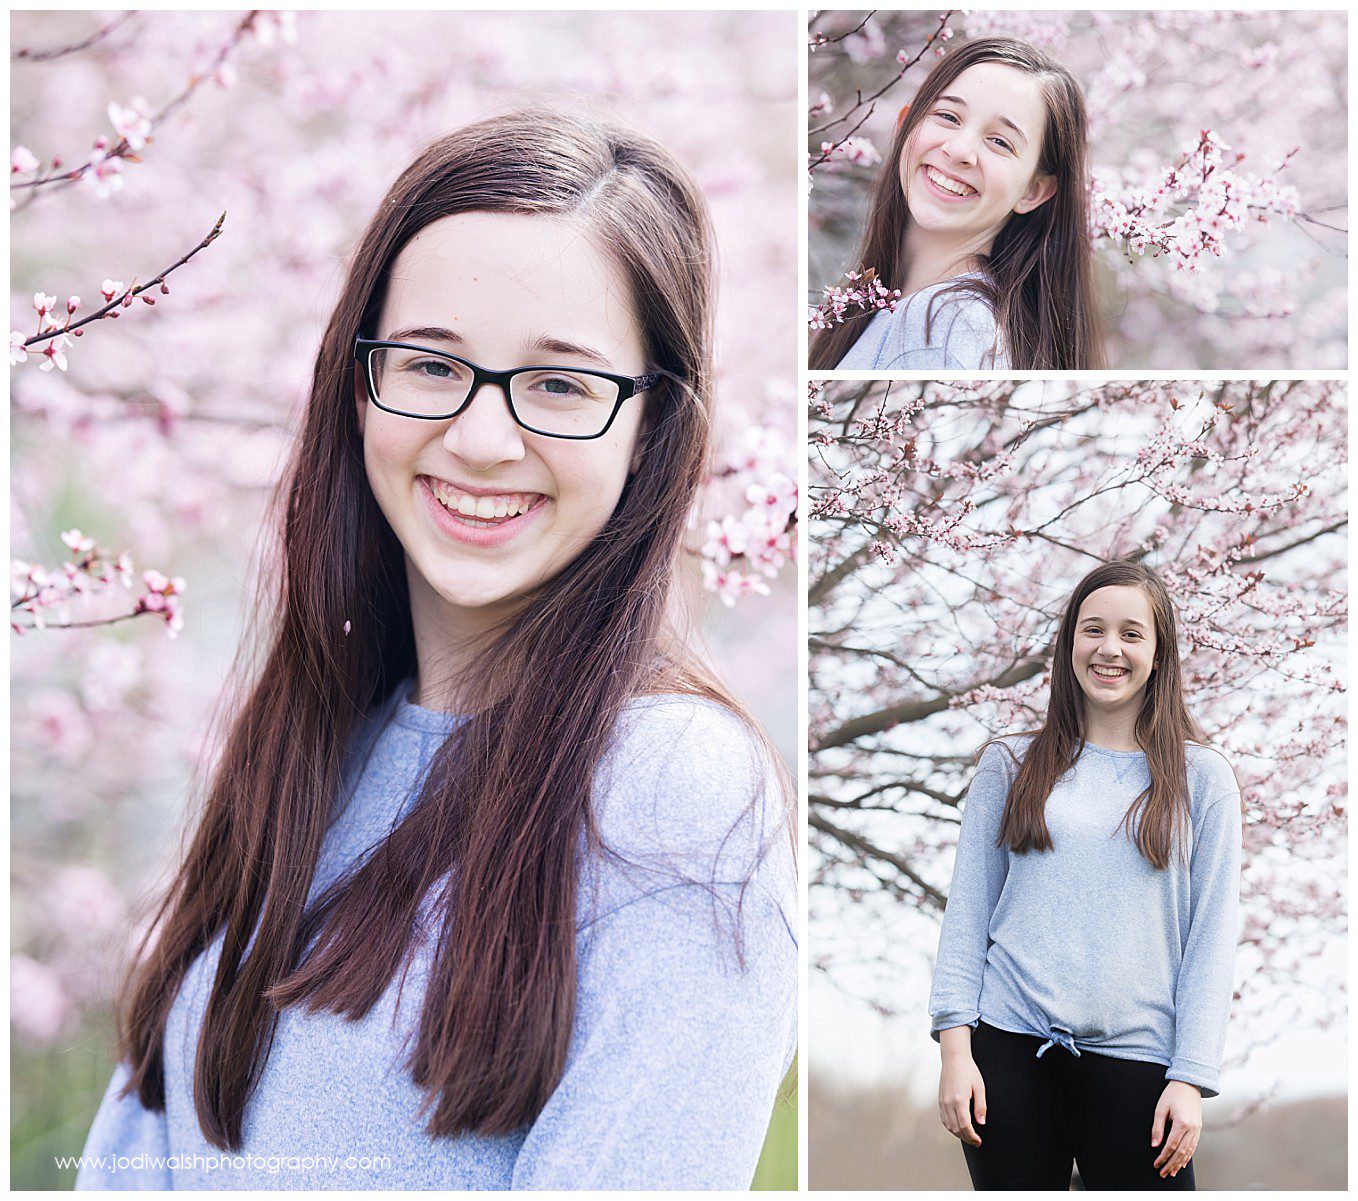 images of a teen girl standing near a tree with light pink blossoms in spring. She has long dark hard and it smiling.